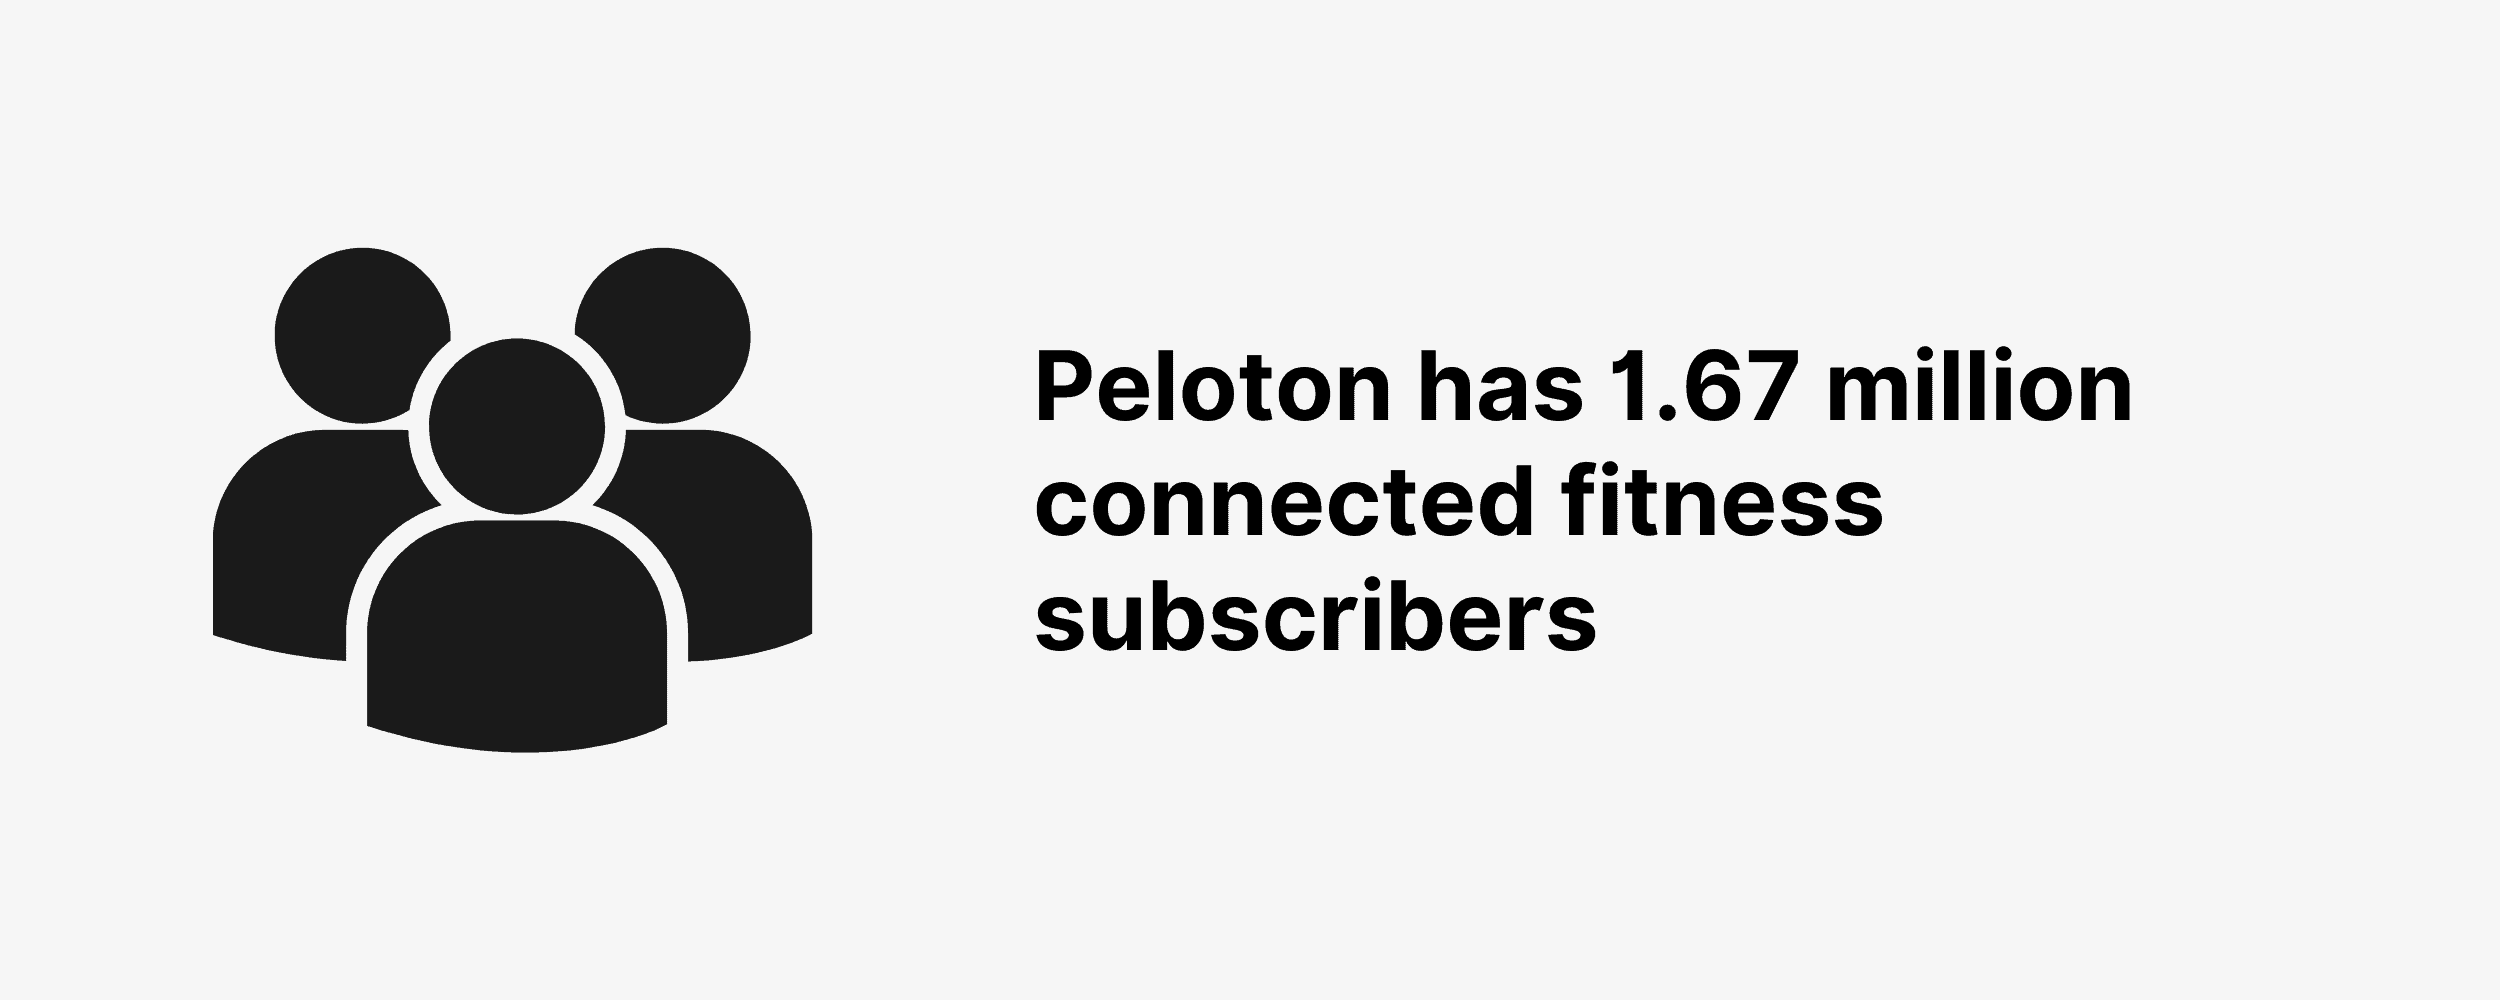 Peloton has 1.67 million connected fitness subscribers